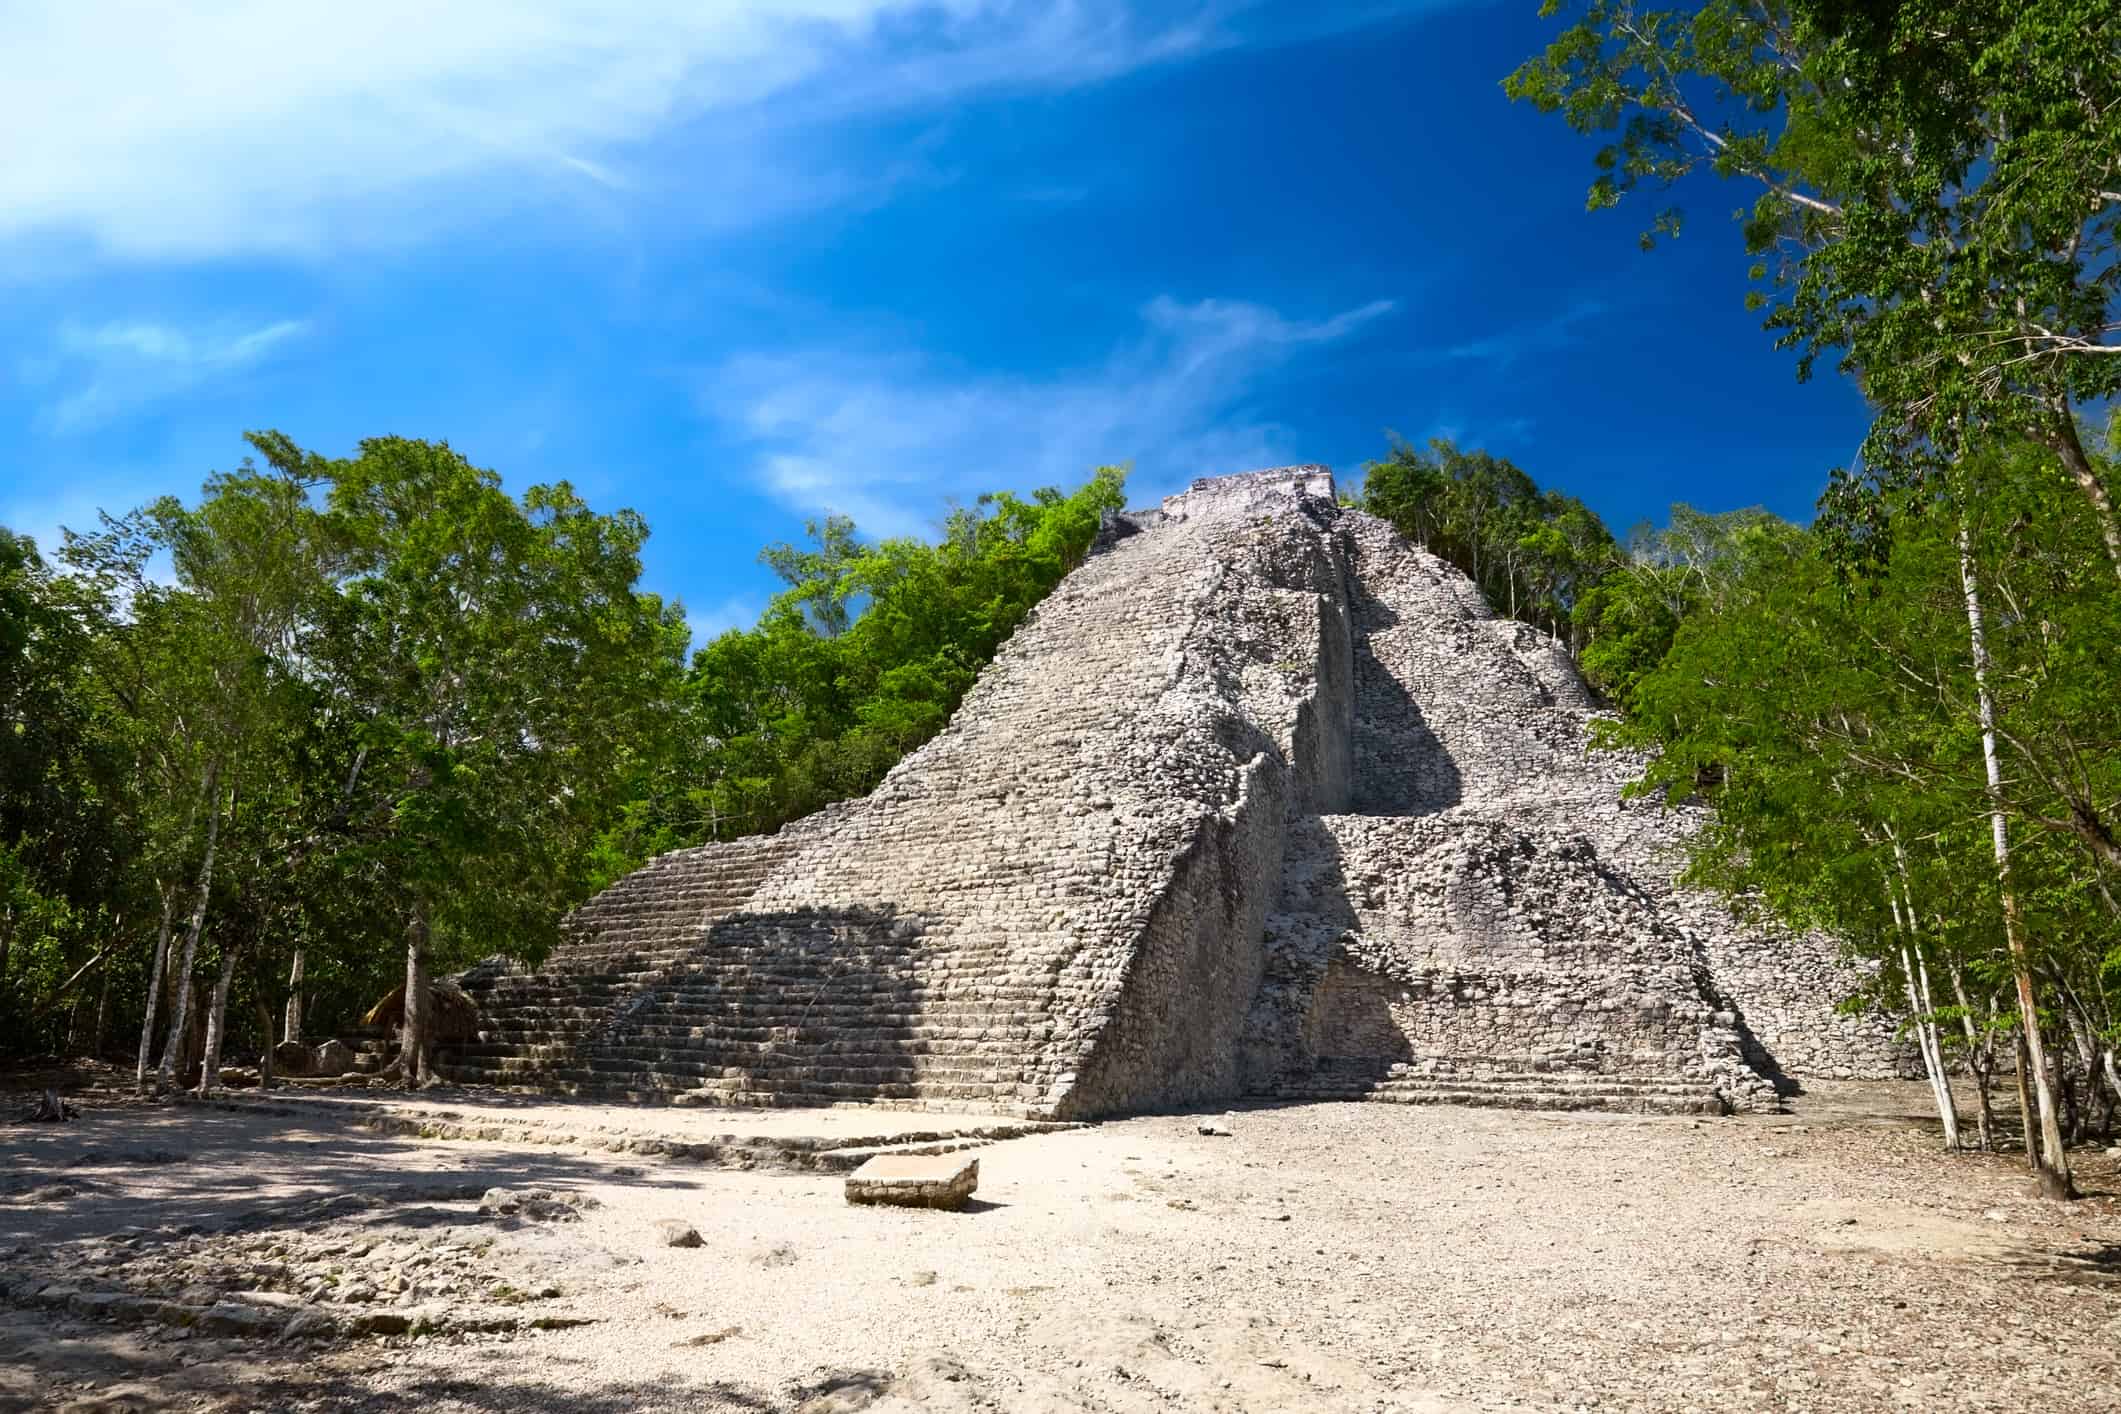 <p>Located in the ancient Mayan city of Coba, there are various pyramids here that are truly impressive. The pyramids and city were built before 800 C.E., and the city at one point during its height had about 50,000 people living there. The site features several pyramids including Nohoch Mul, Ixmoja, La Iglesia, The Ancient Pyramid, and the Pyramid of the Painted Lintel. Each of them is unique in their way and some of them have been recently uncovered by archeologists. The site of Coba is still being excavated by archeologists, as most of the site is still covered by centuries of dirt and vegetation.</p>